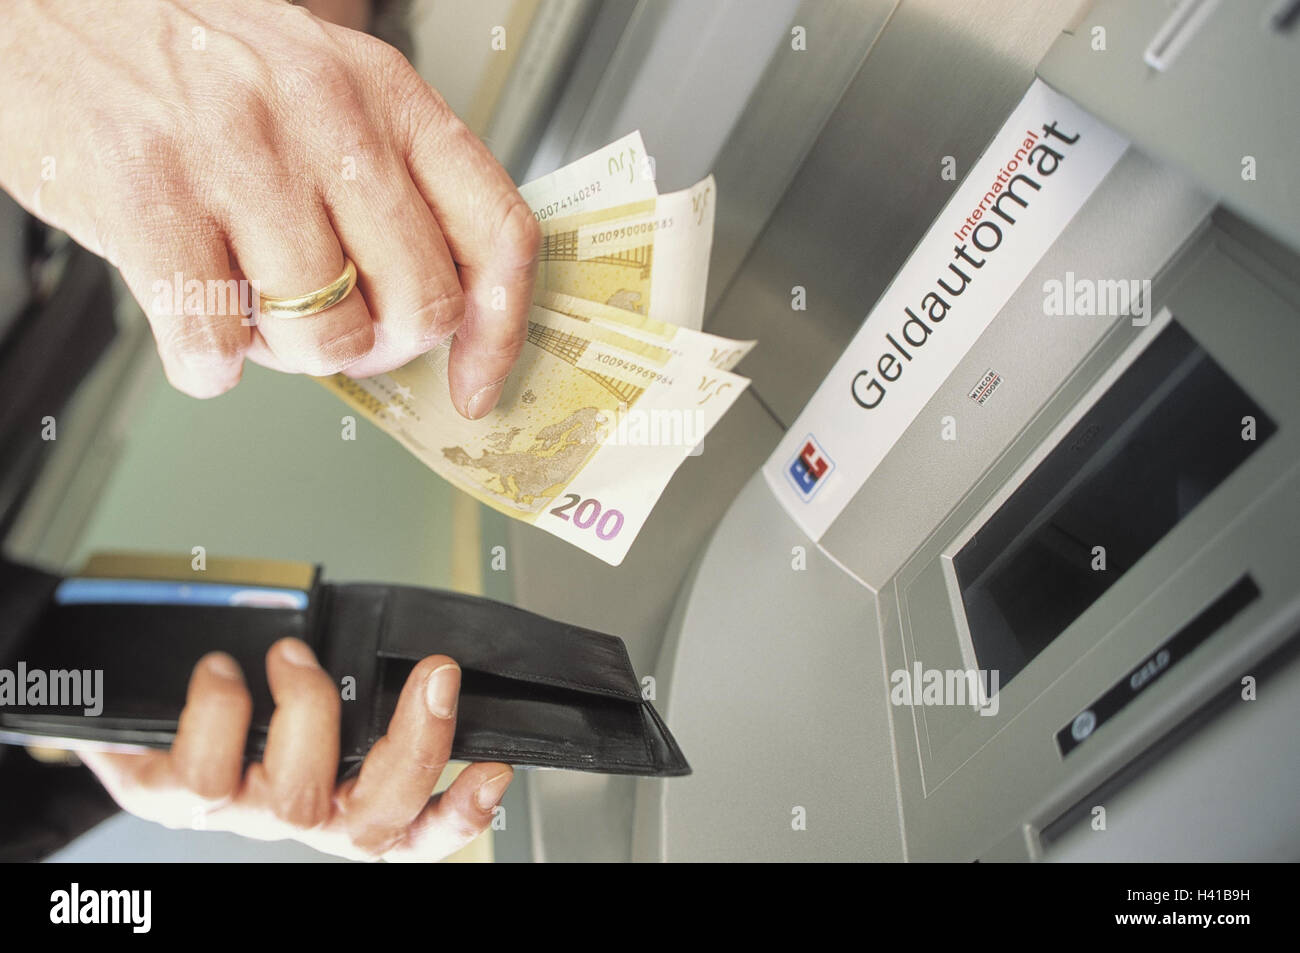 Bancomat, man, detail, hands, purse, bank notes, credit card, outside, bank, credit institute, withdrawal, monetary removal, automatic cash dispenser, EC-card, euro, banknotes, meanses payment, money, take off Stock Photo